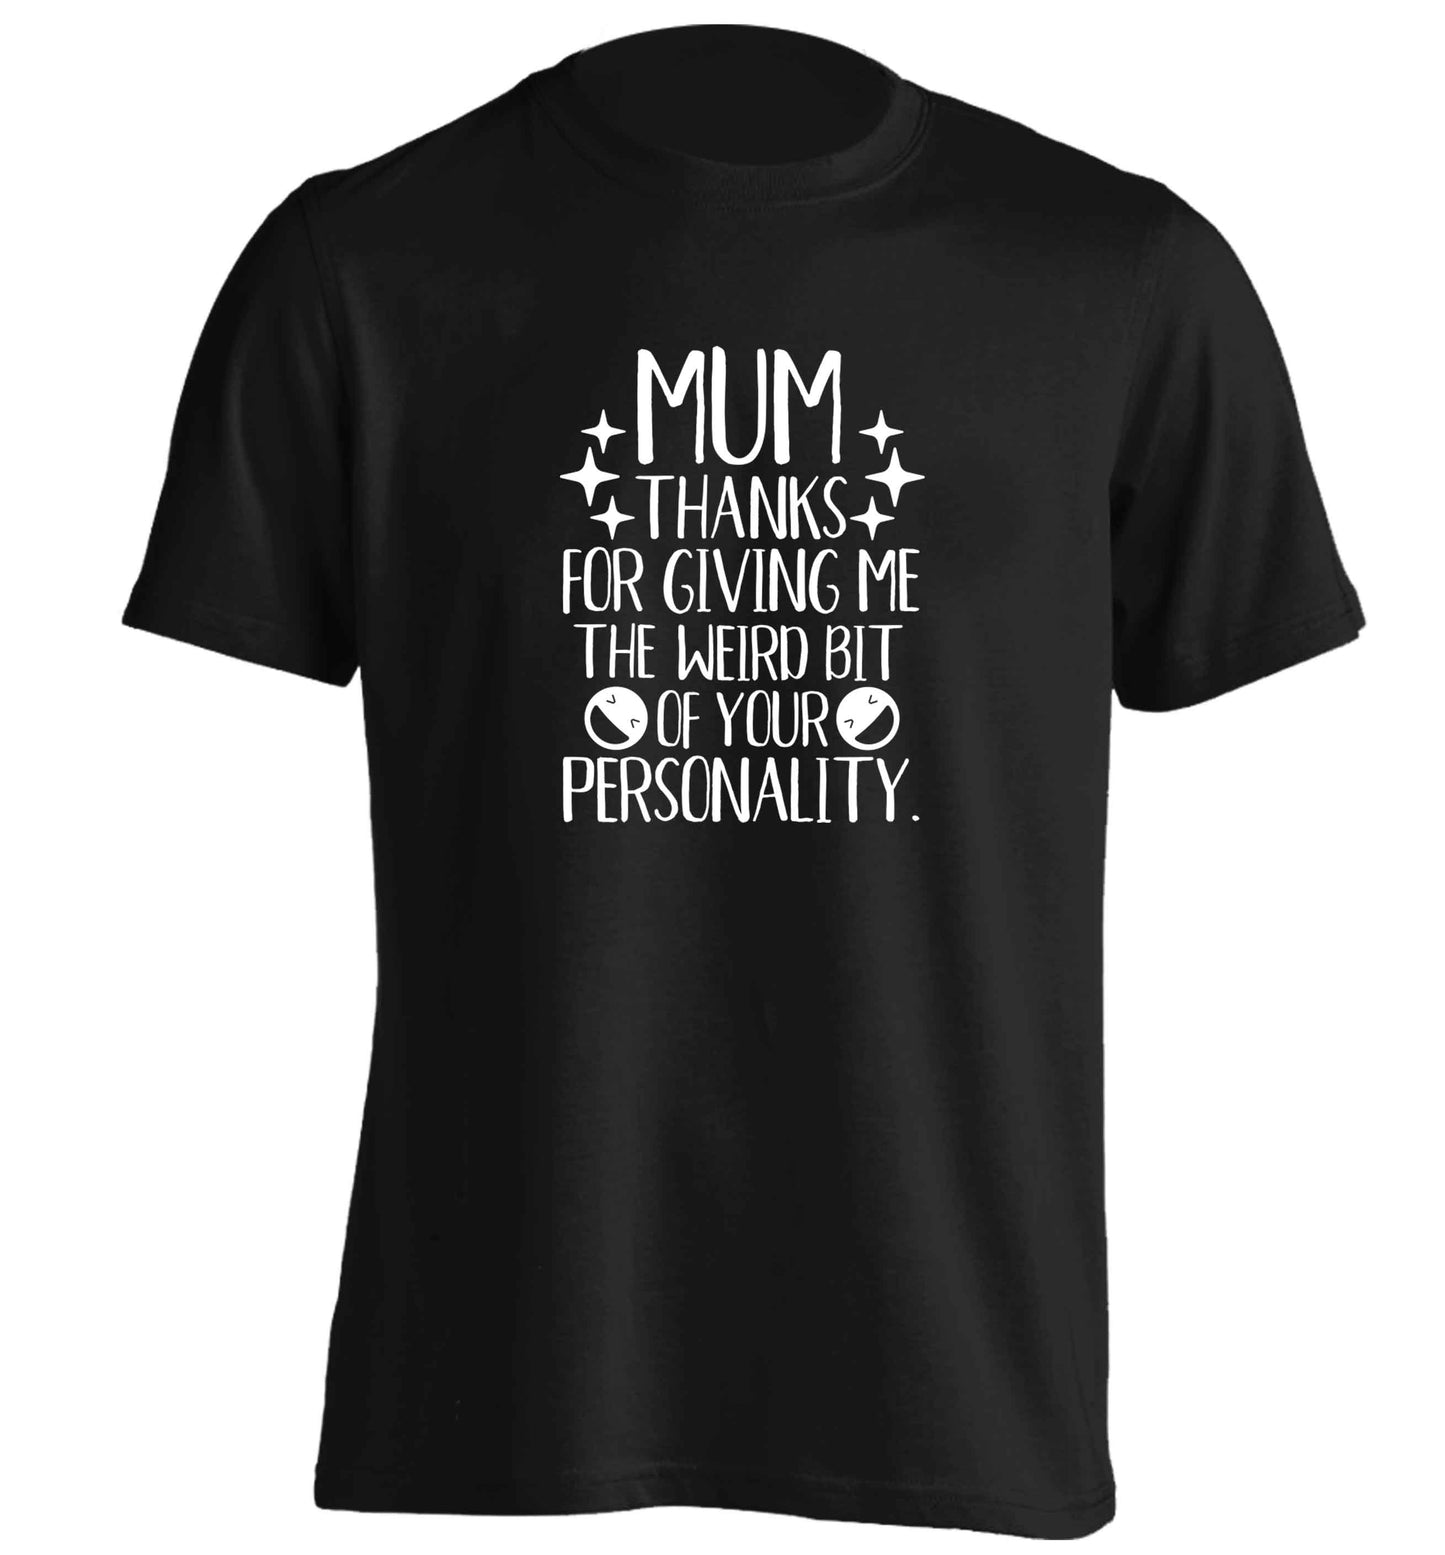 Mum, I love you more than halloumi and if you know me at all you know how deep that is adults unisex black Tshirt 2XL